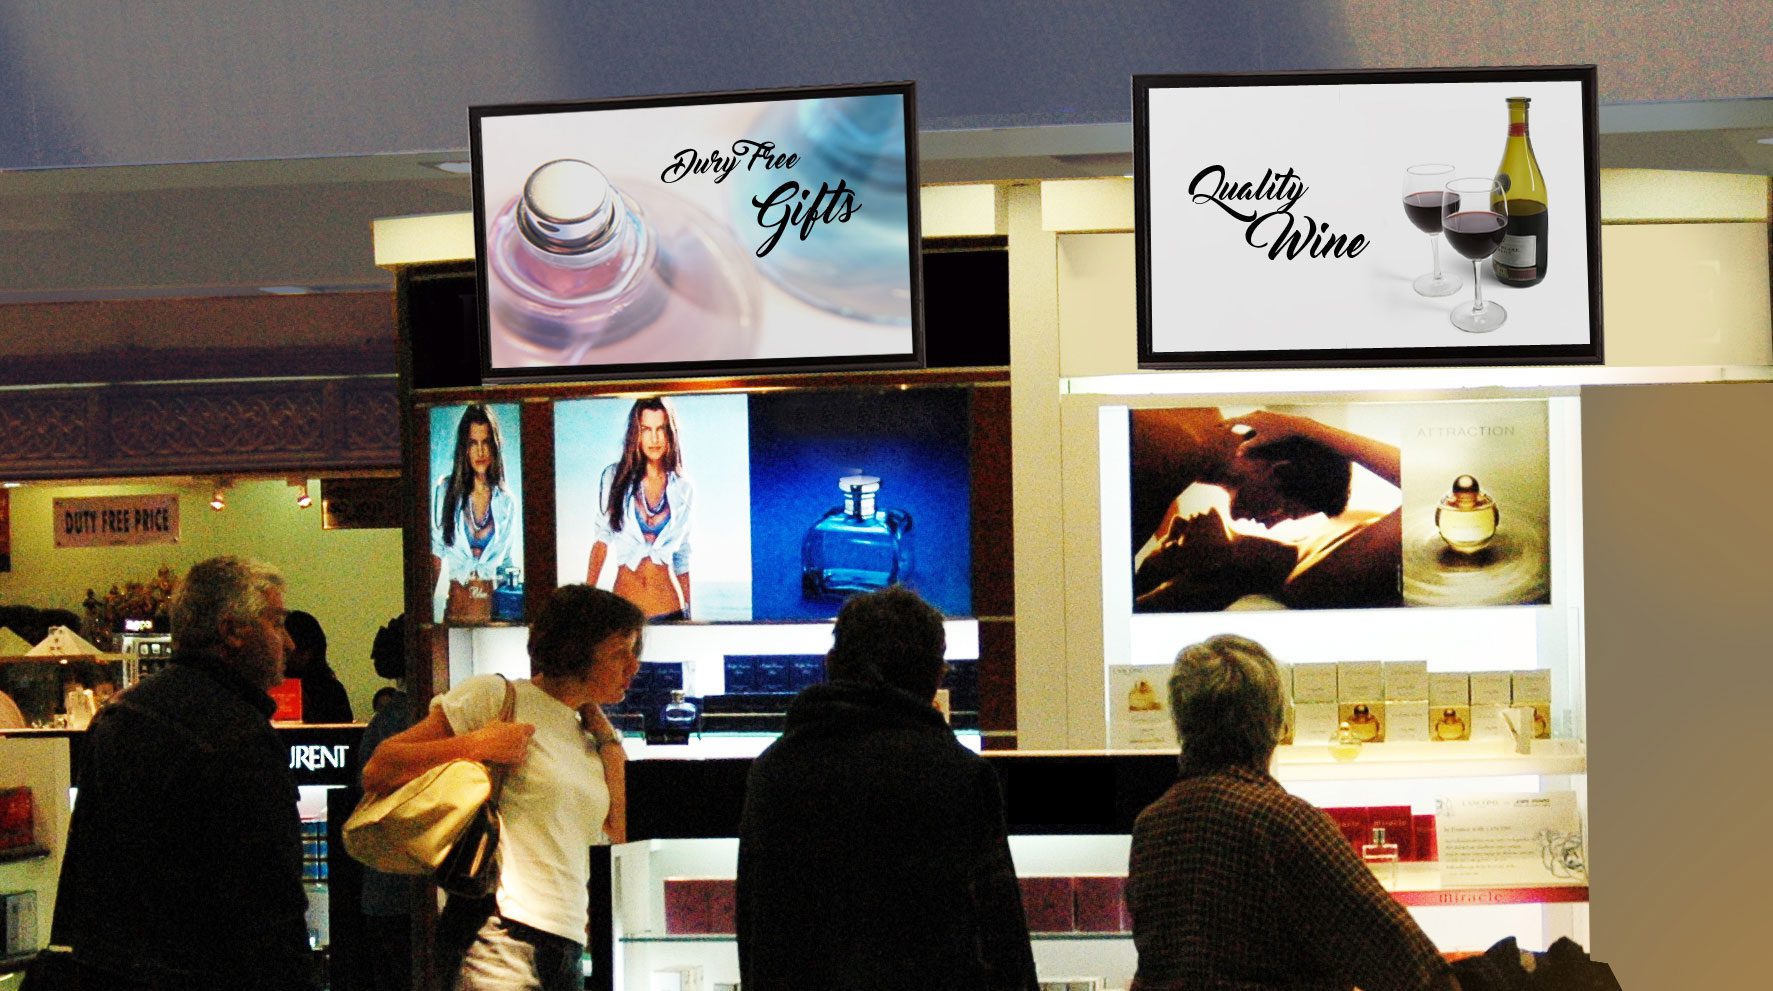 LED Display Signs display Duty free ads at airport